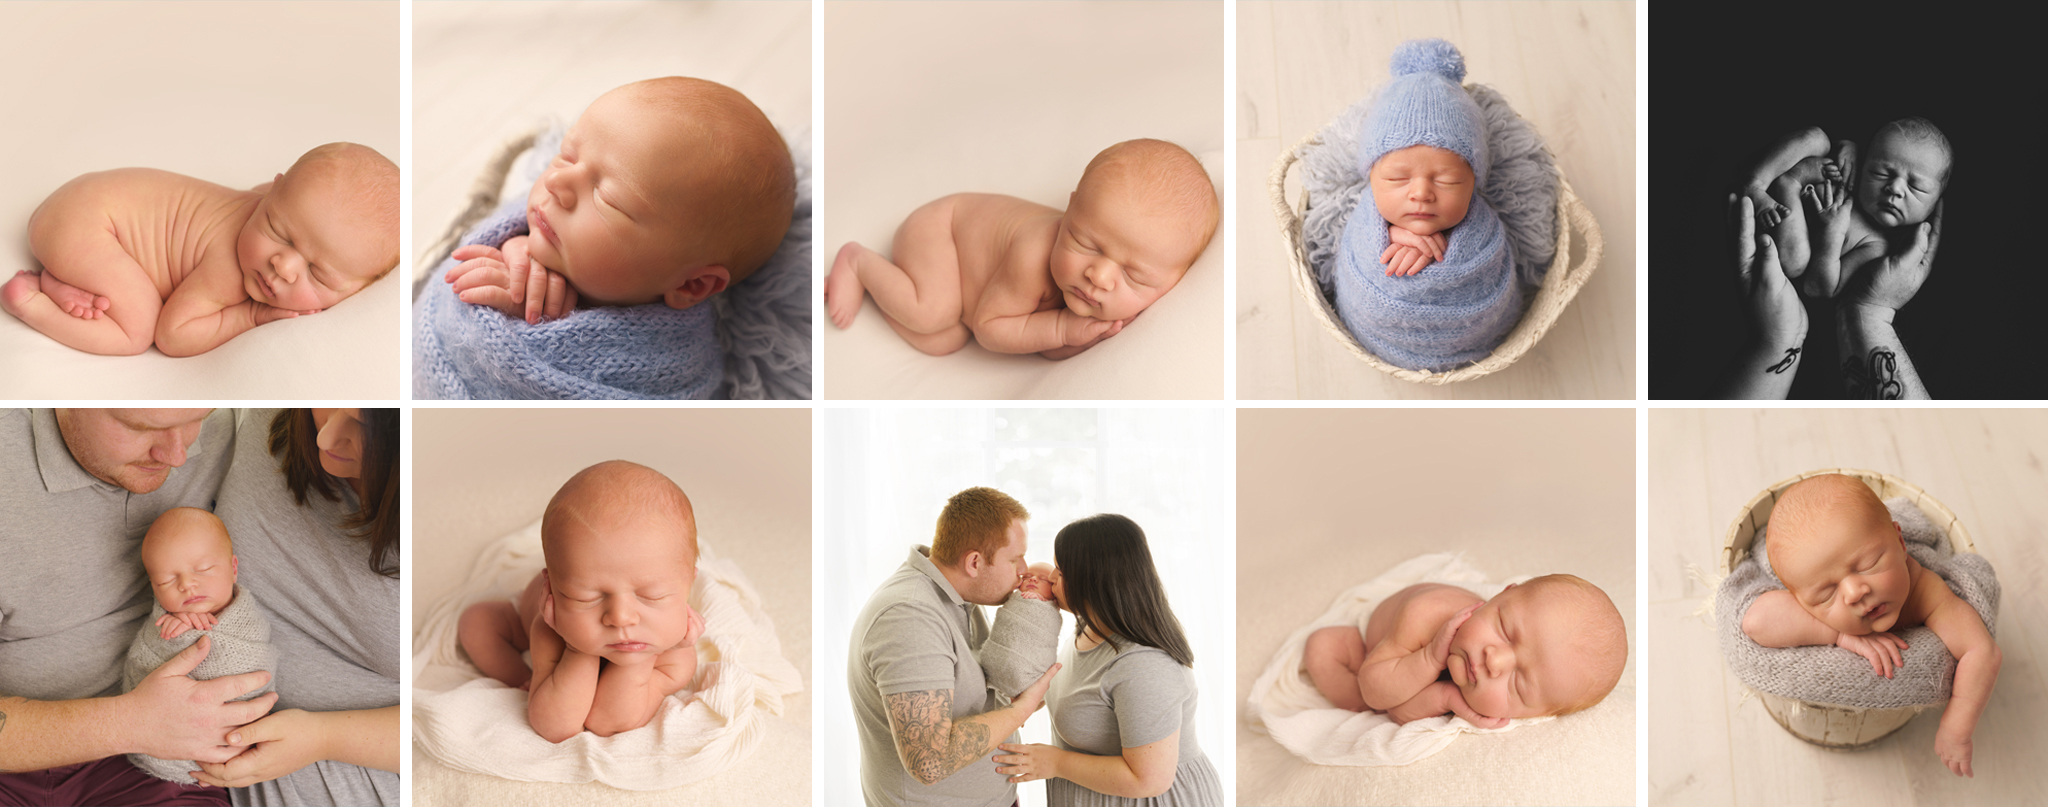 Newborn Sessions: What to Expect from your Images